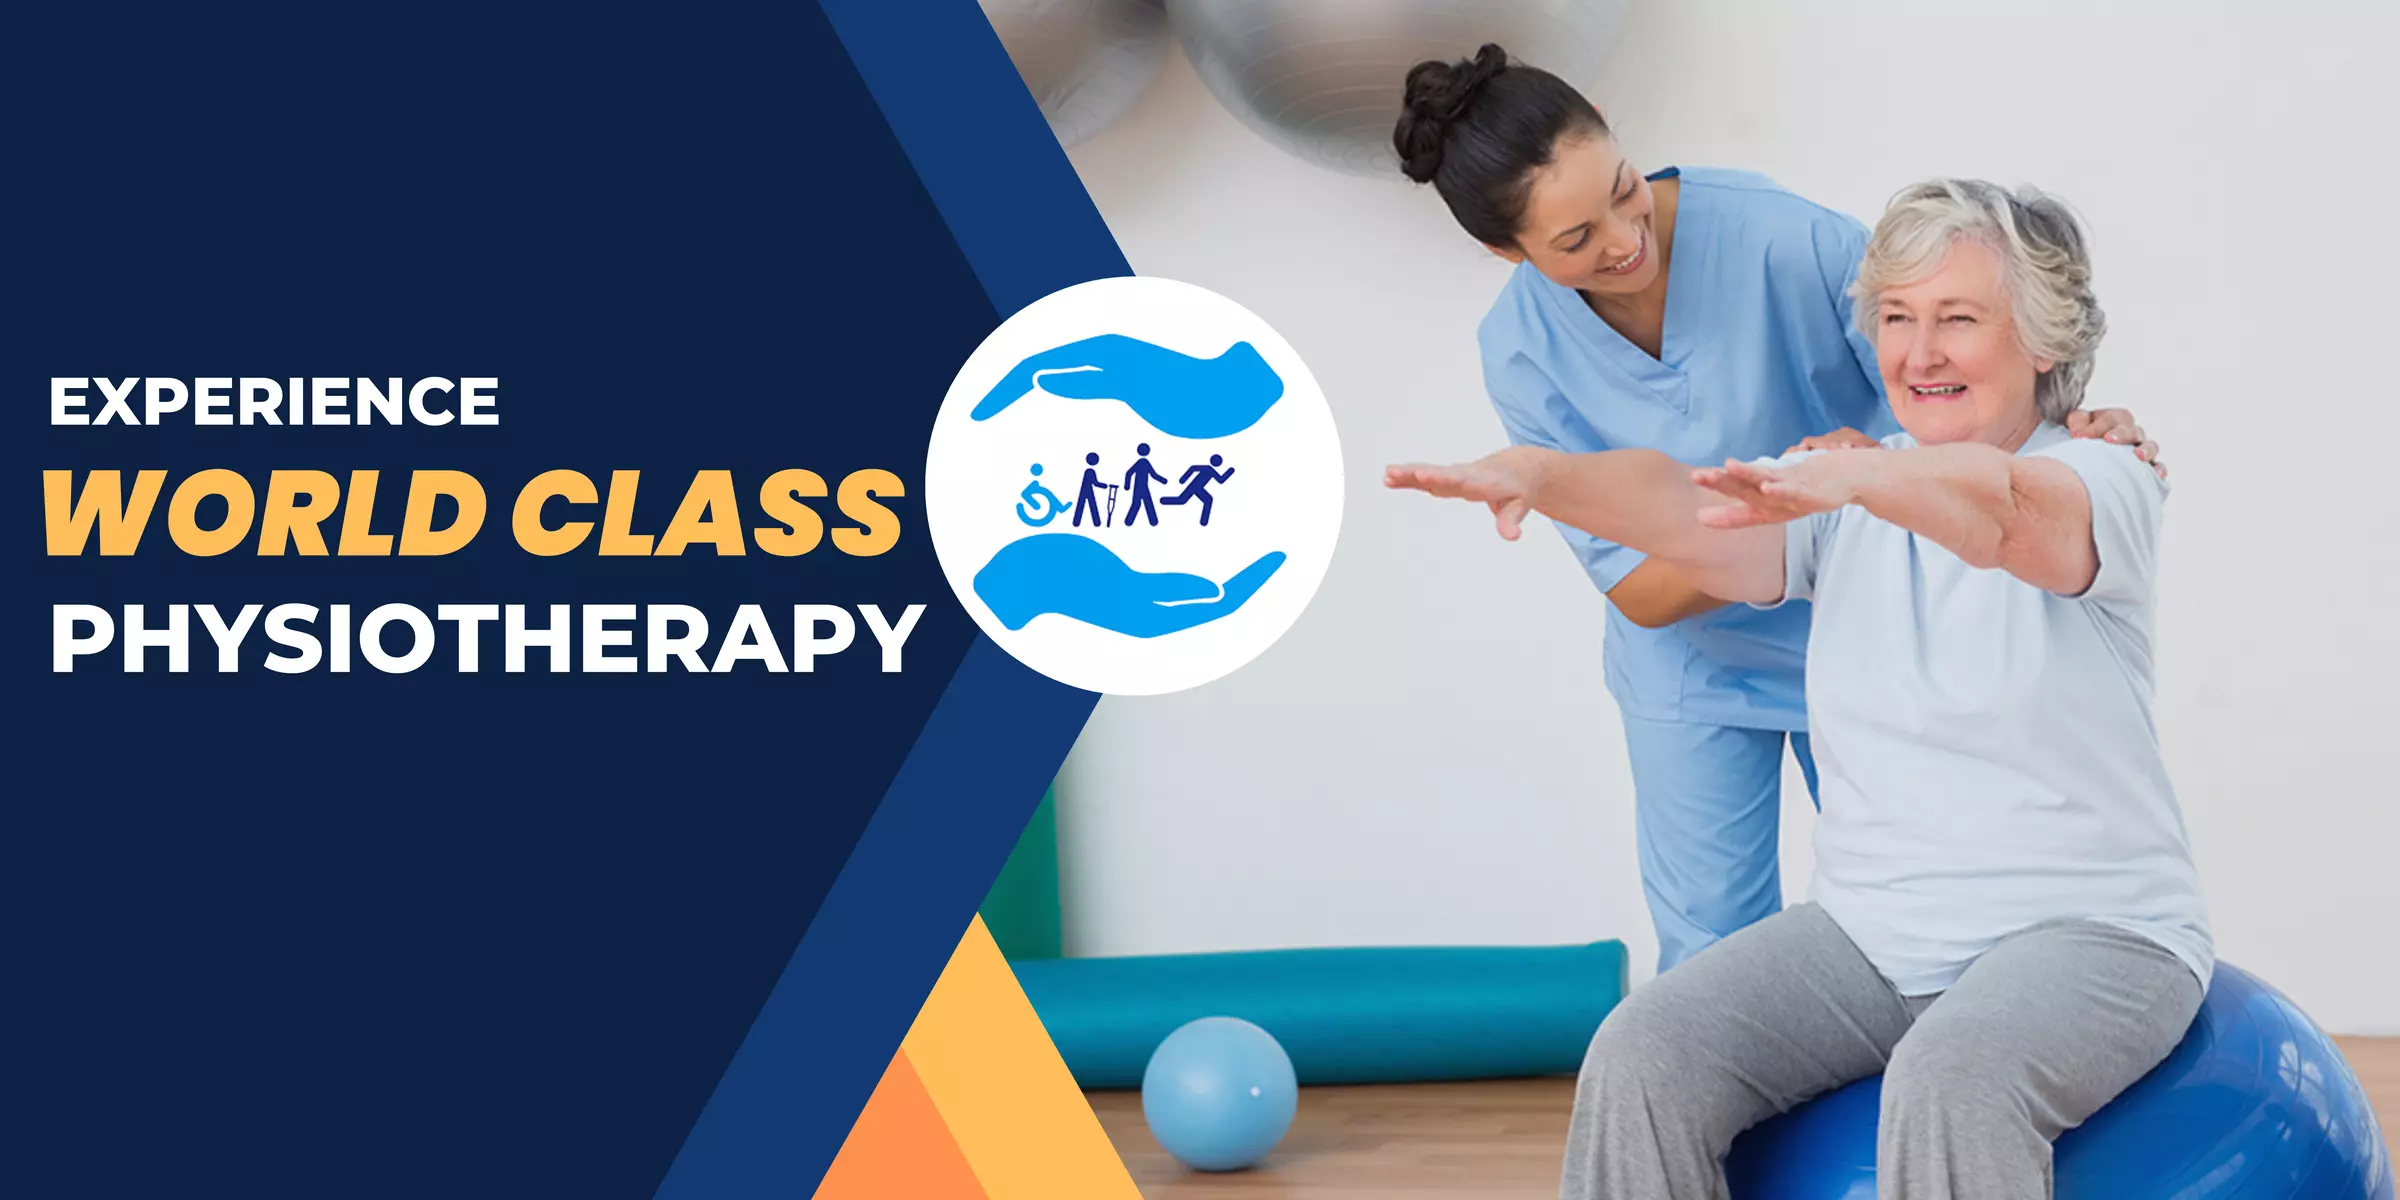 Best Physiotherapy Clinic in Bangalore - Healing Hands Advanced Physiotherapy Clinic